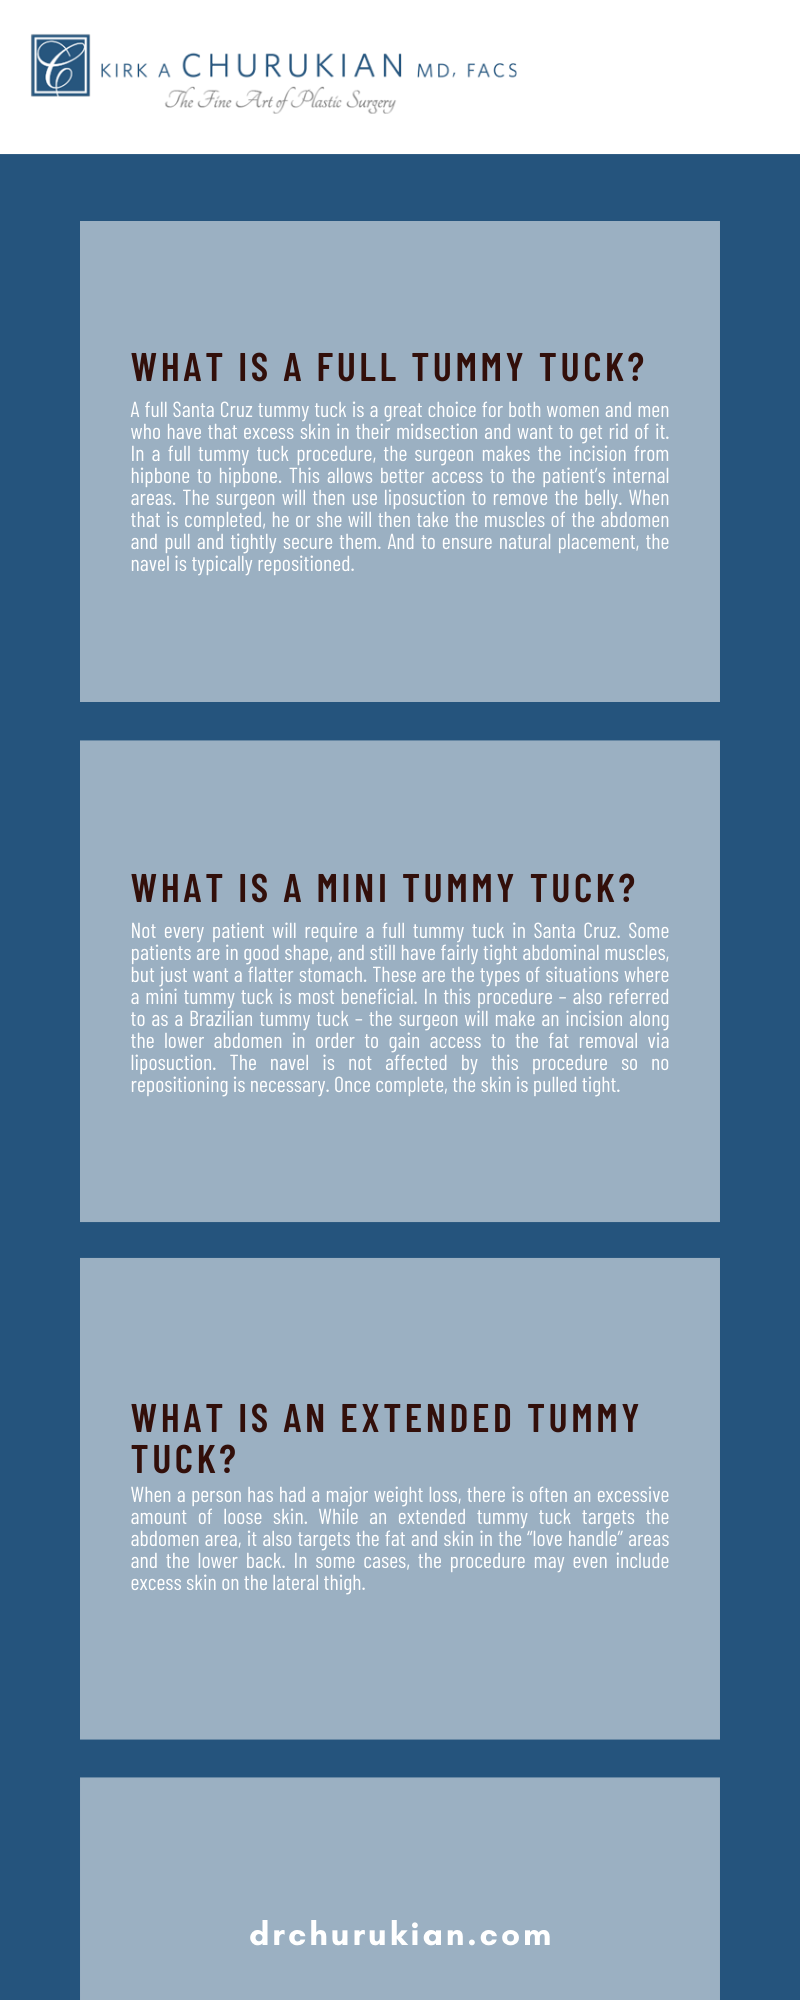 WHAT IS A FULL TUMMY TUCK INFOGRAPHIC